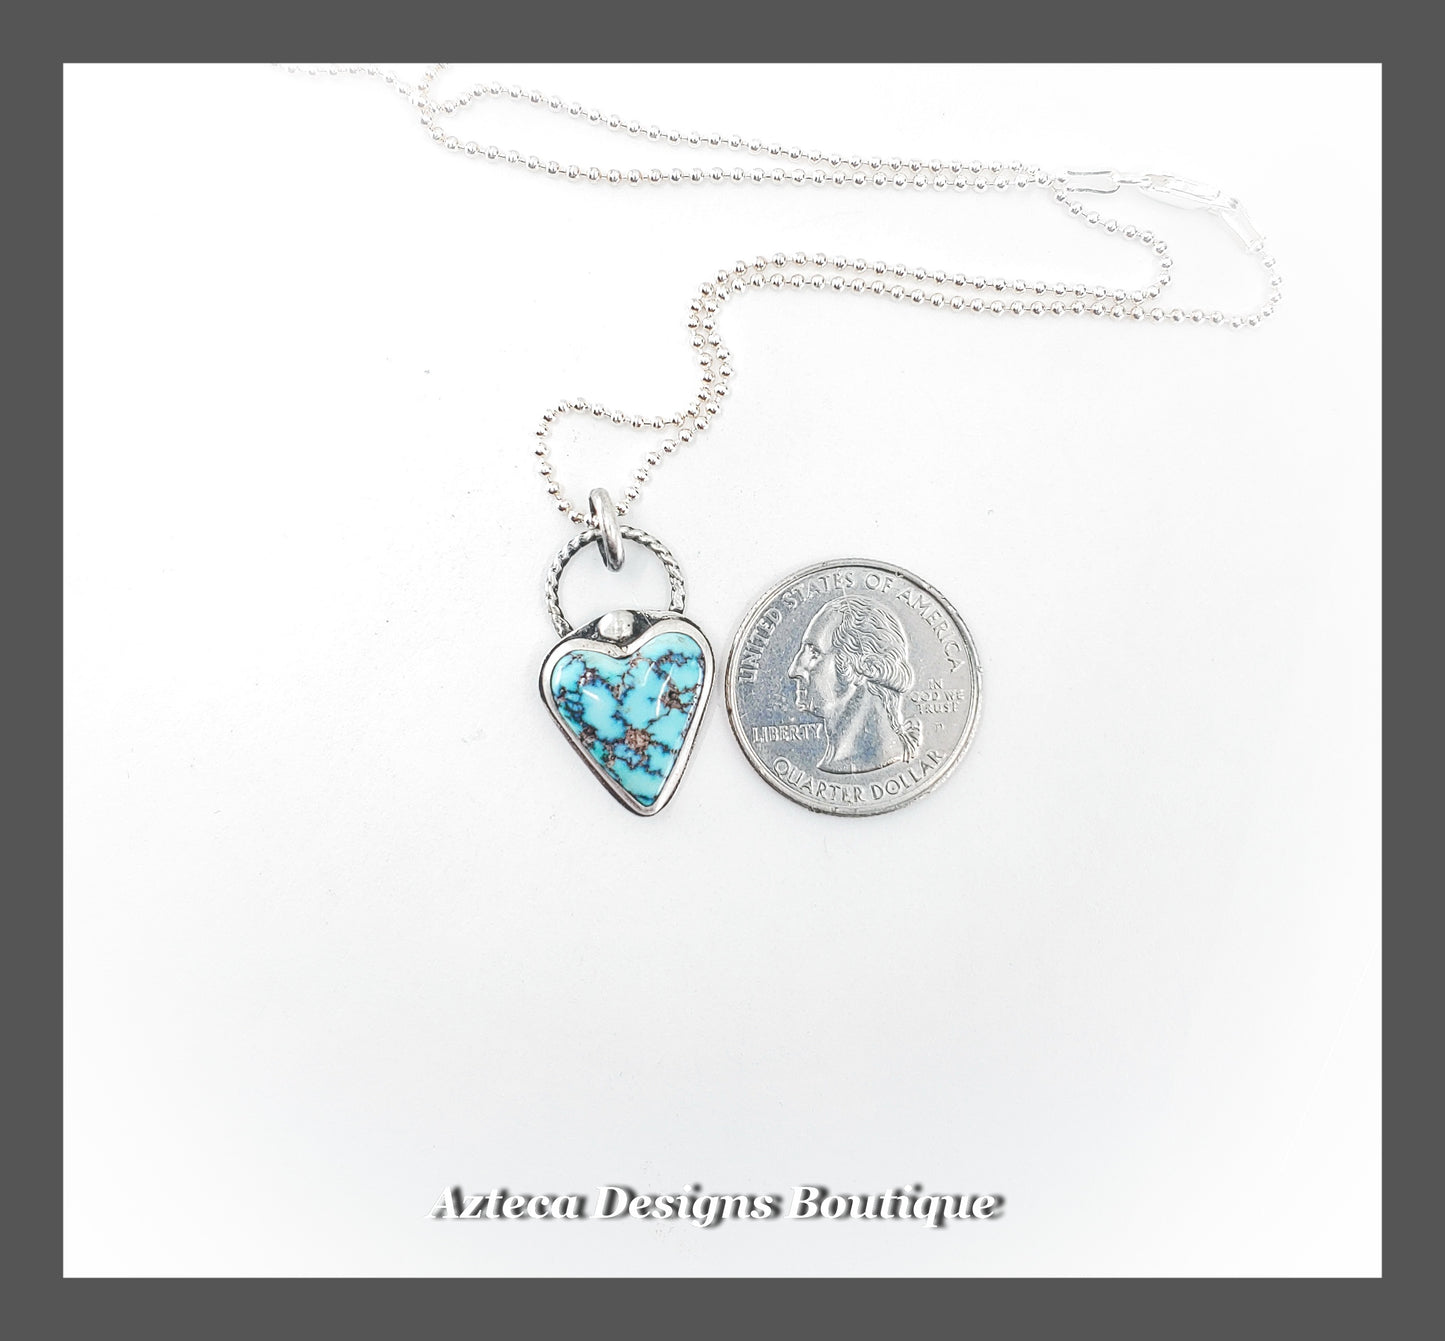 Blue Kingman Turquoise Heart + Hand Fabricated Sterling Silver Necklace